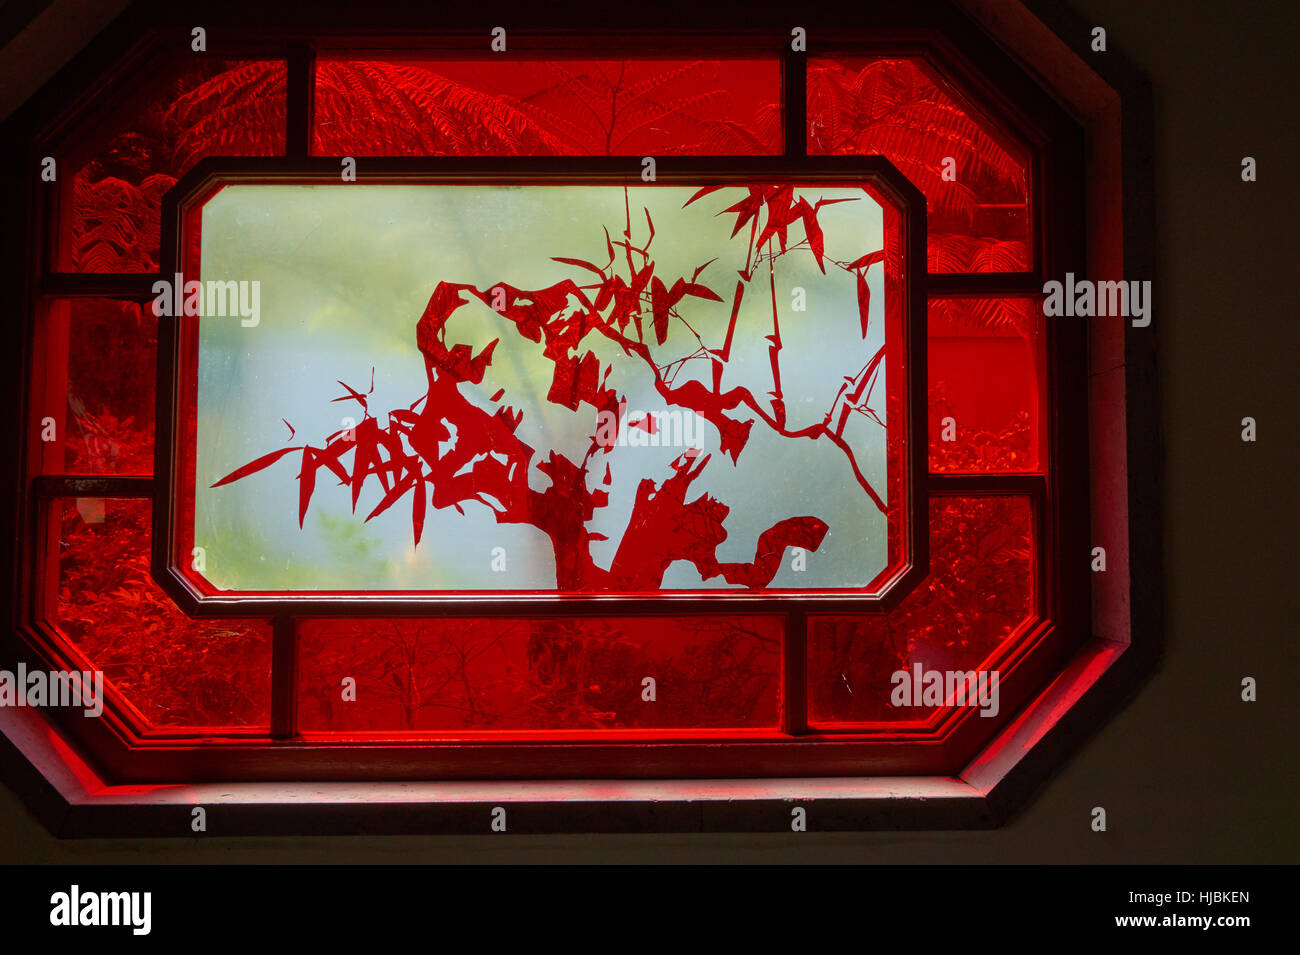 Transparent window with Chinese art surrounded by red frame. Stock Photo